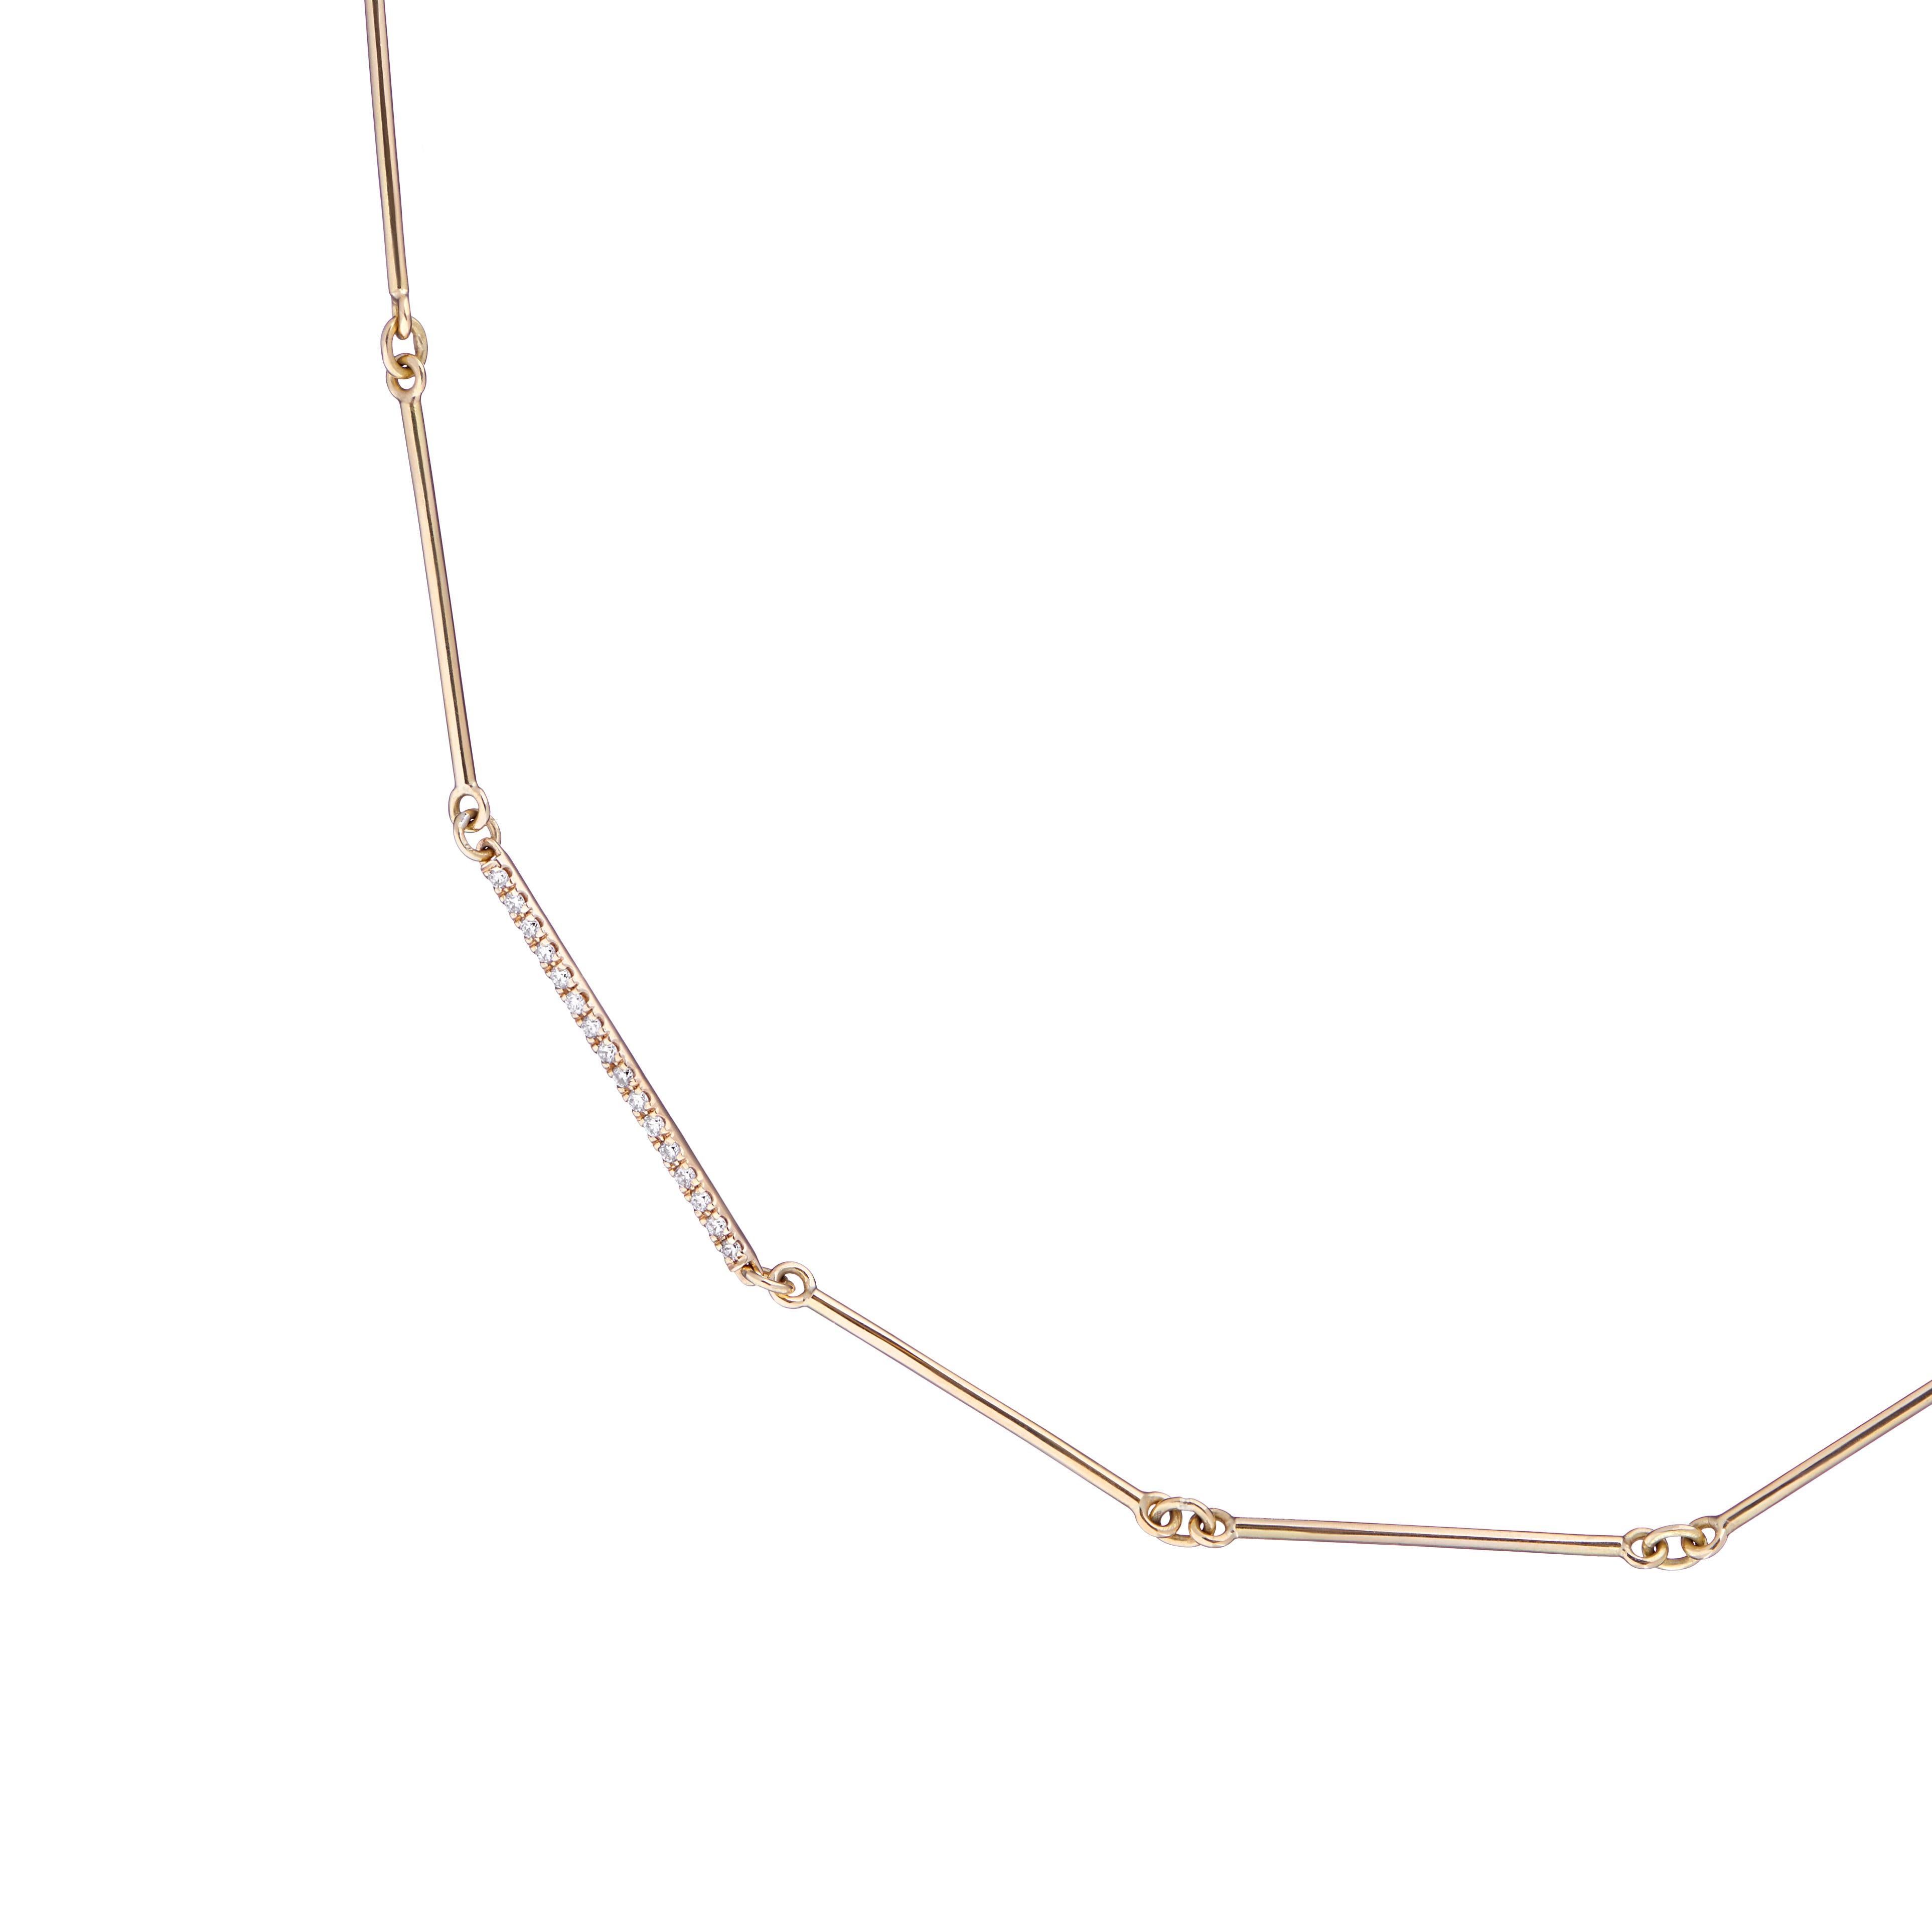 Timeless and elegant - this 18kt yellow gold 18